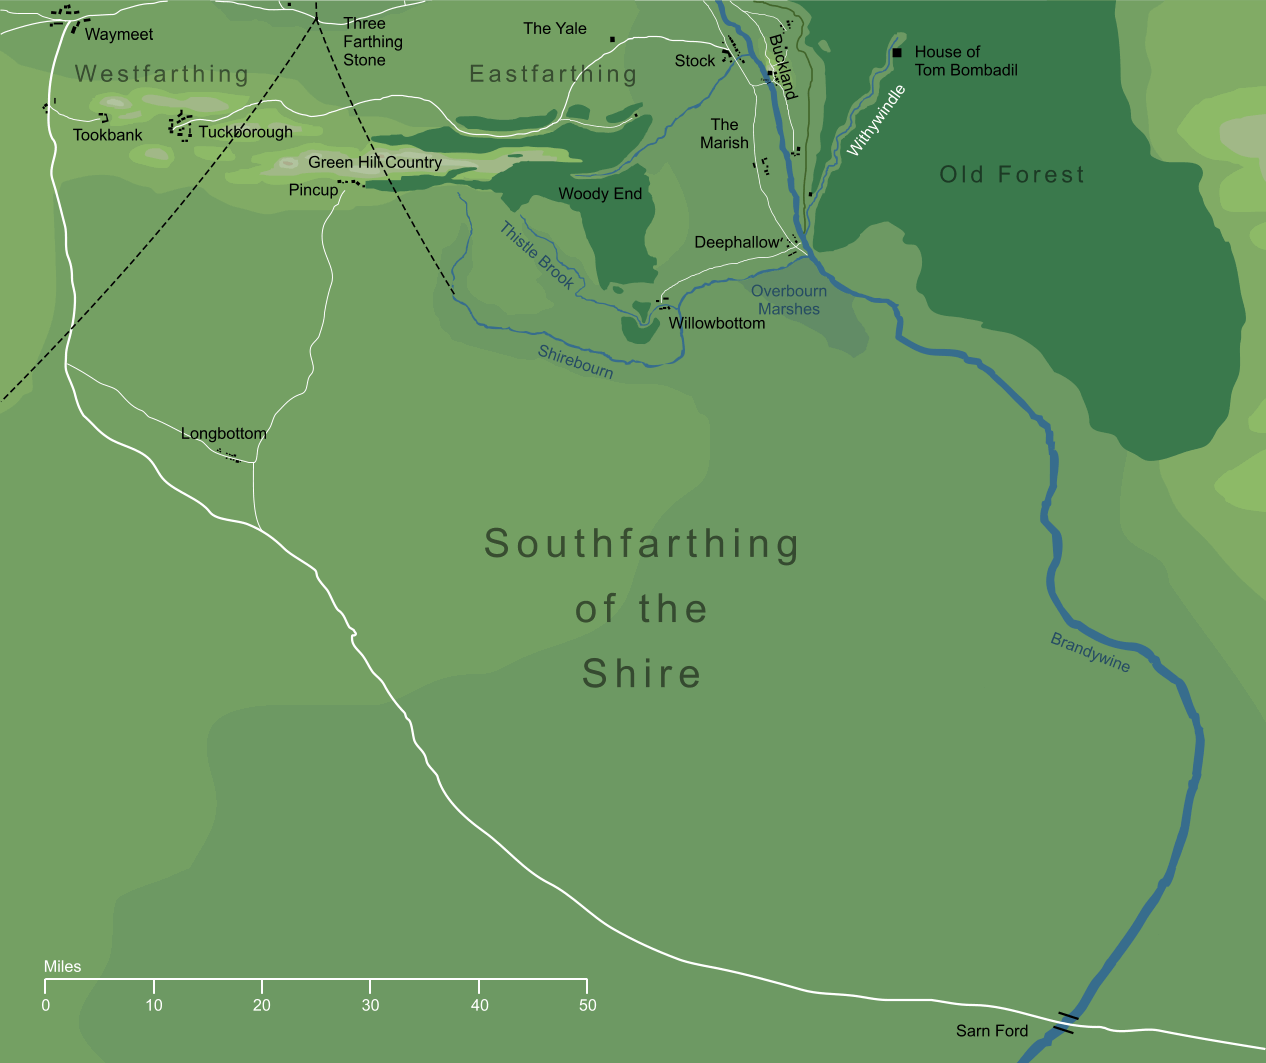 Map of the Southfarthing of the Shire